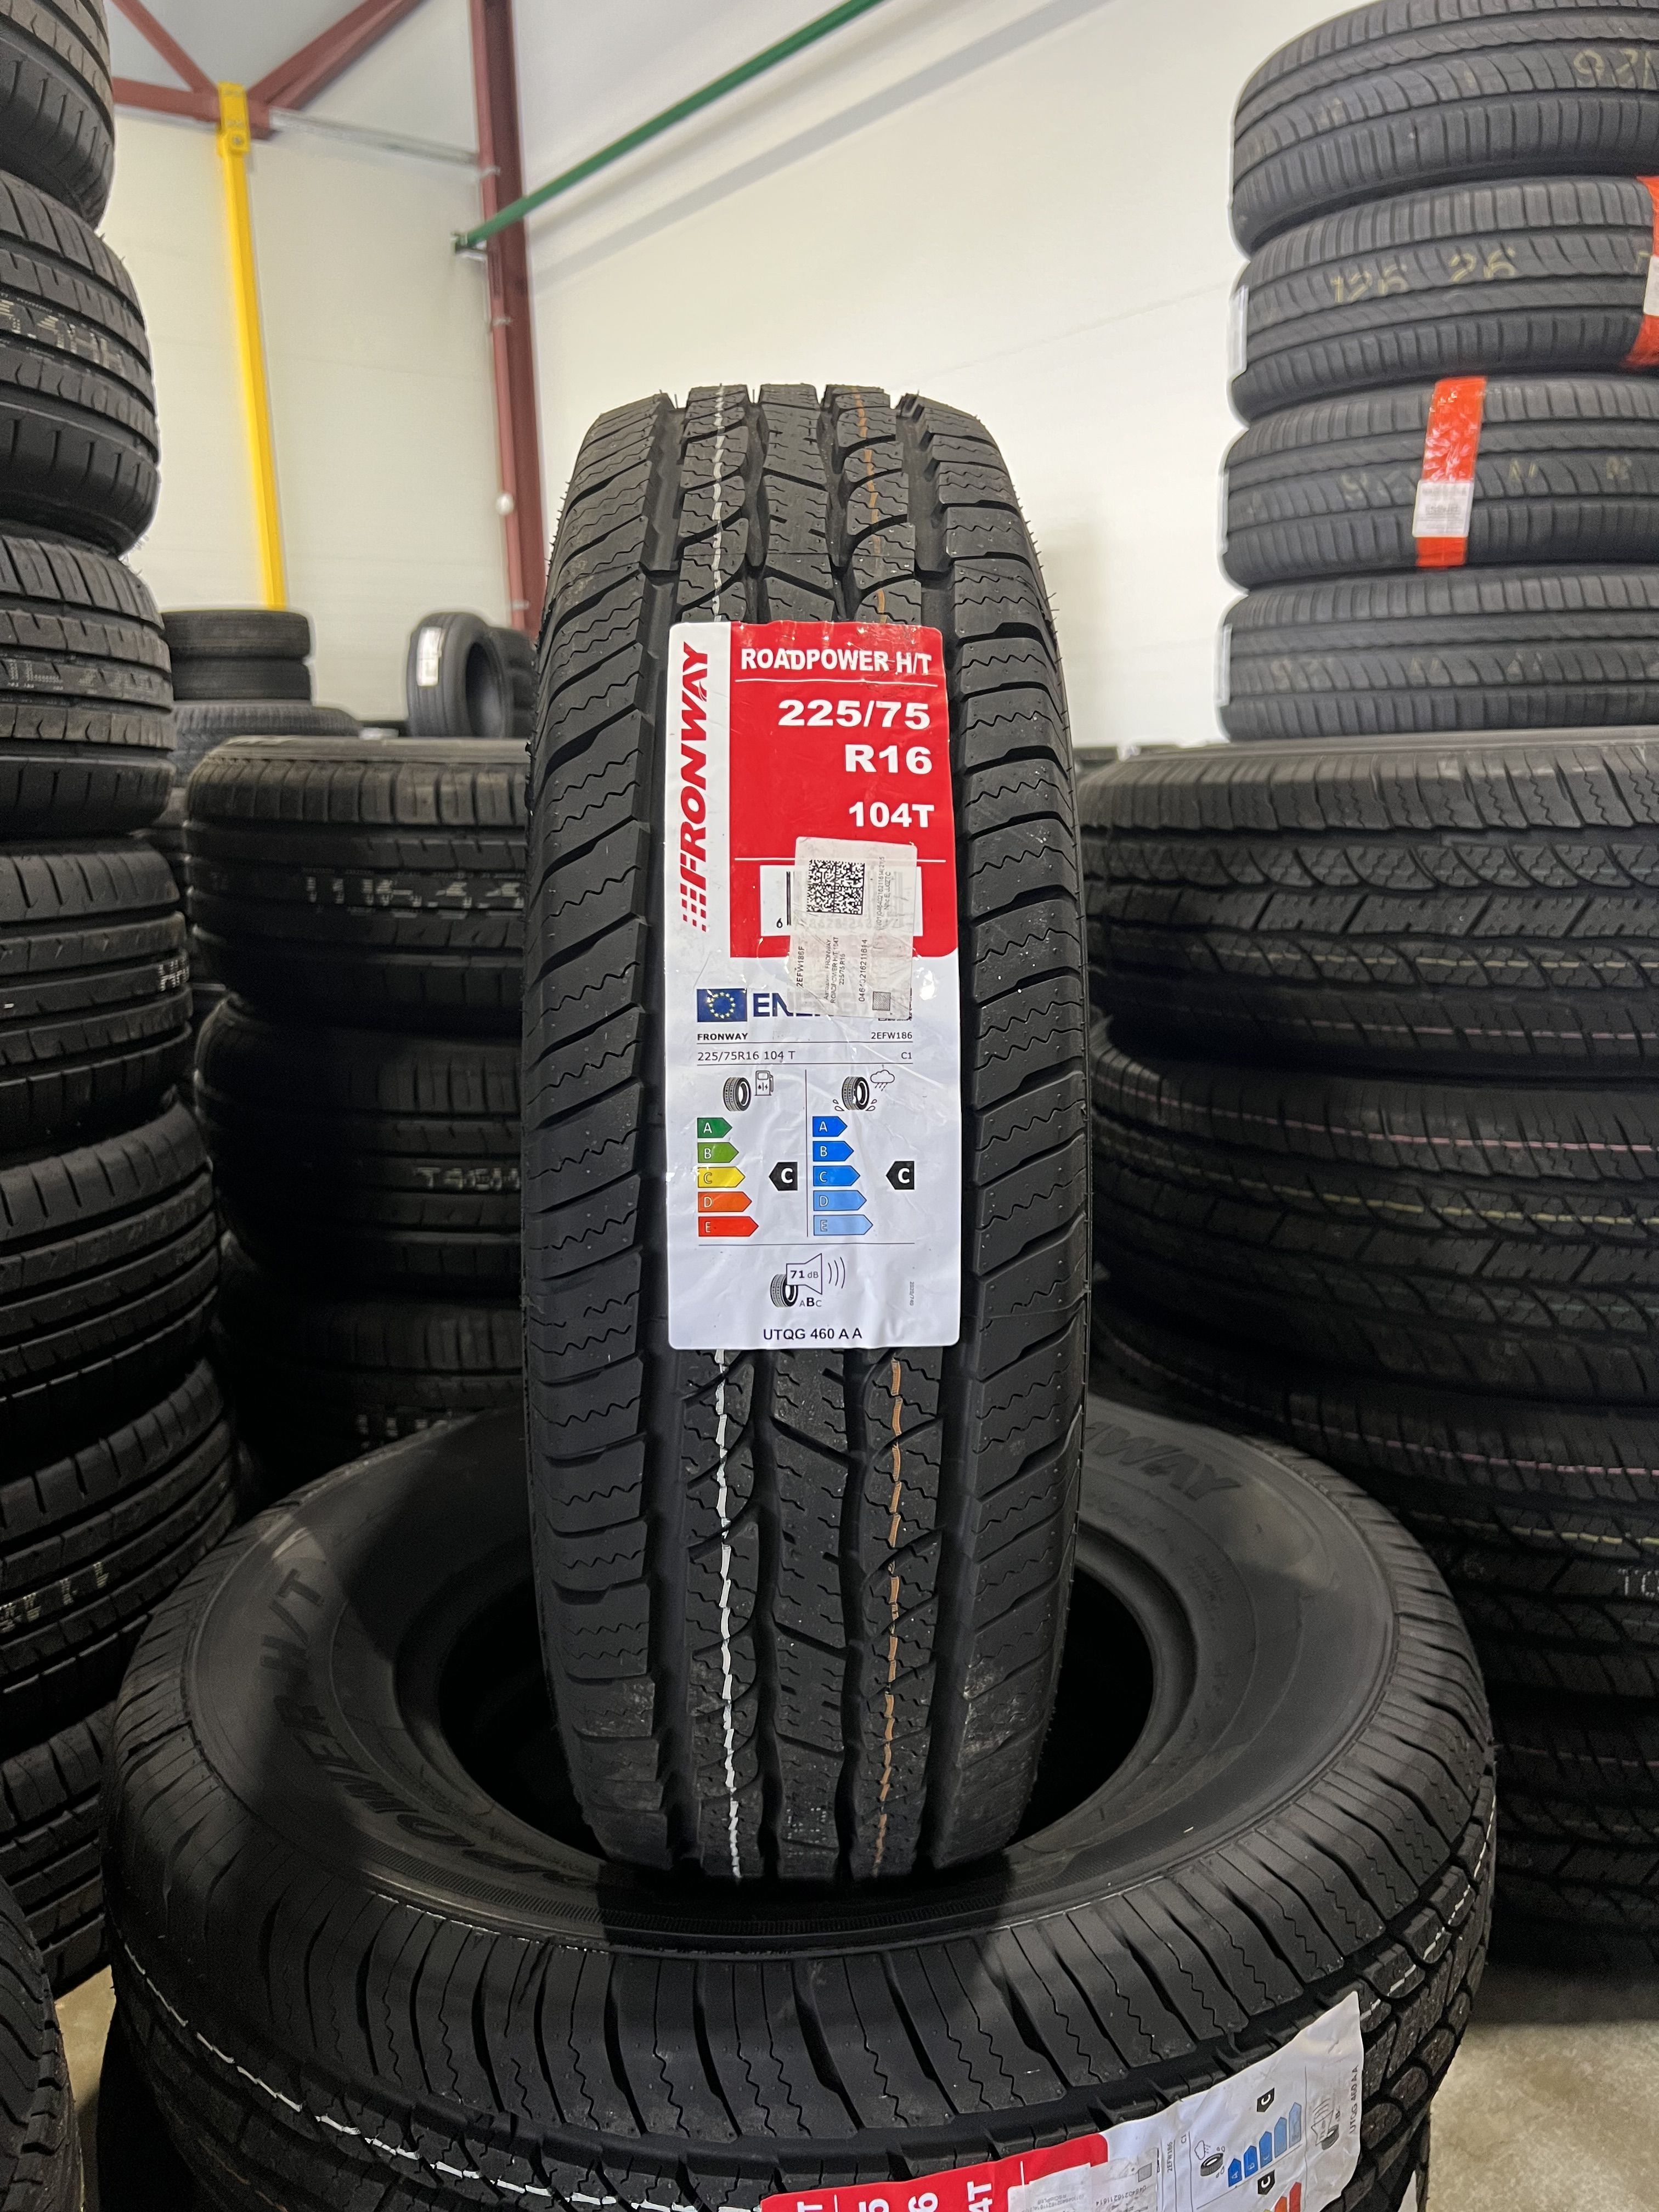 Fronway eurus 08 отзывы. Fronway Roadpower h/t. 235/55 R18 Fronway Roadpower h/t 79 104h XL. Fronway Rockblade a/t II 215/65 r16 98t. Шина Fronway eurus 08.